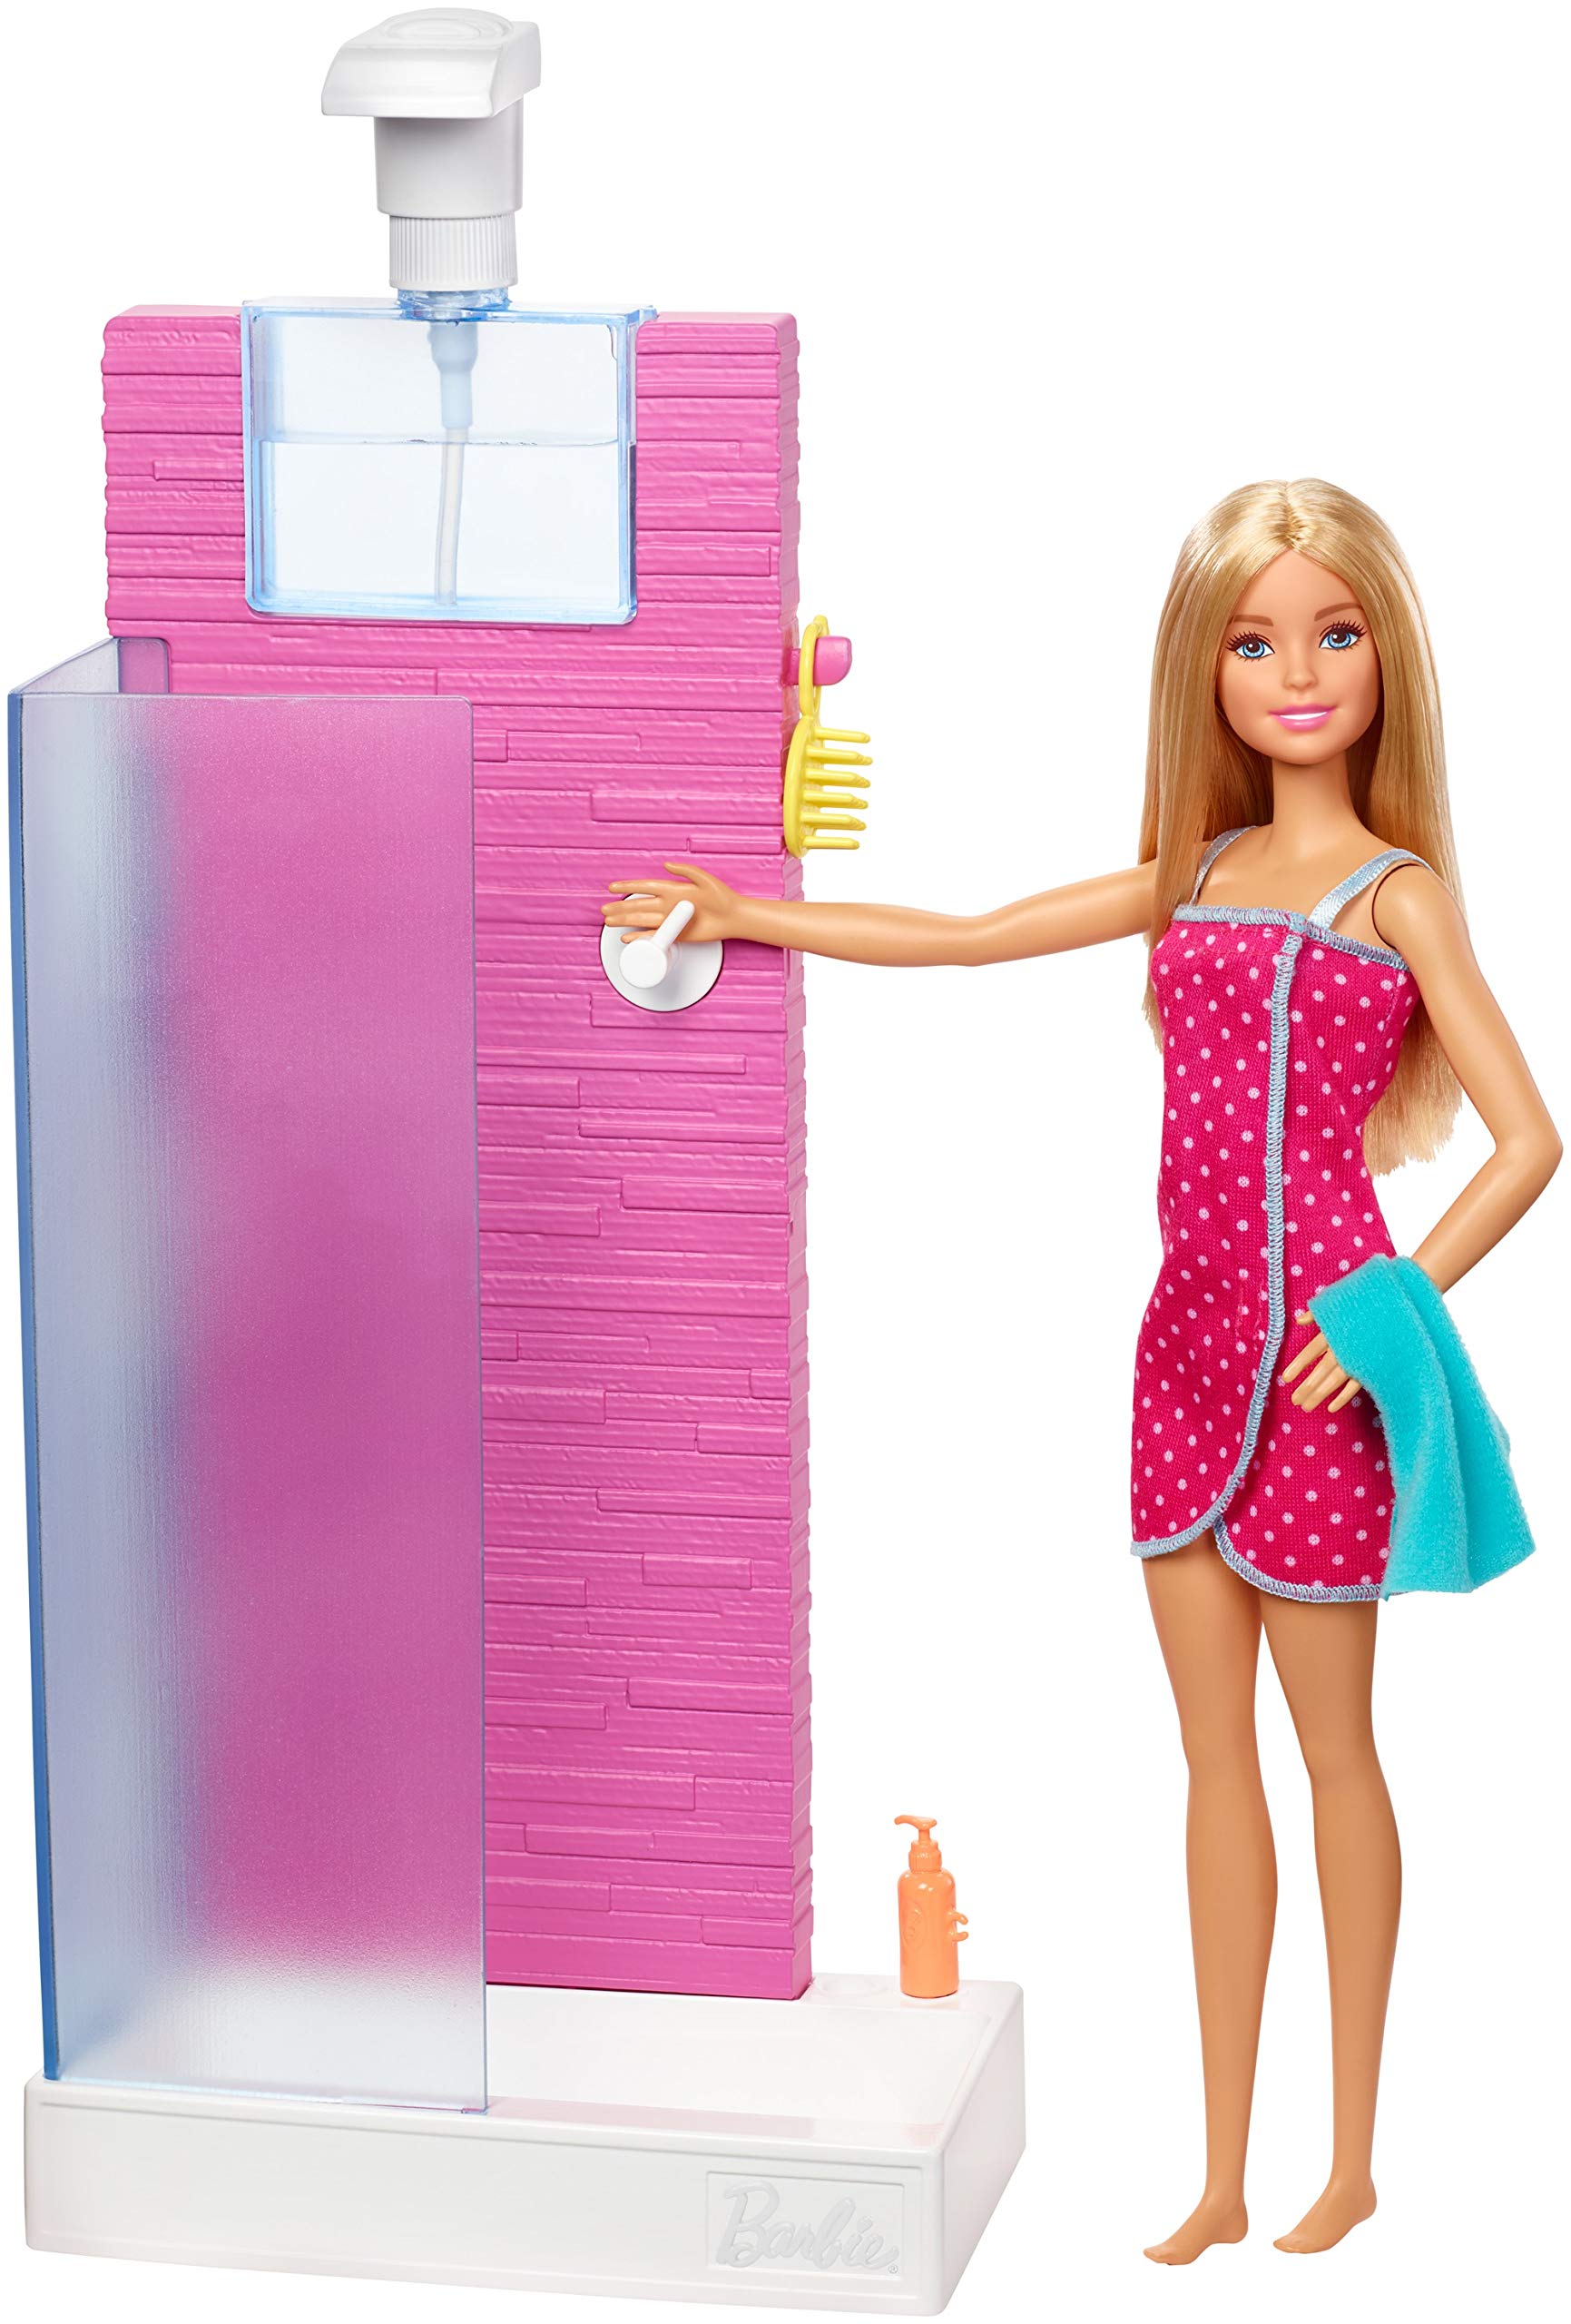 Barbie Doll and Furniture Set, Bathroom with Working Shower and Three Bath Accessories, Gift Set for 3 to 7 Year Olds​​